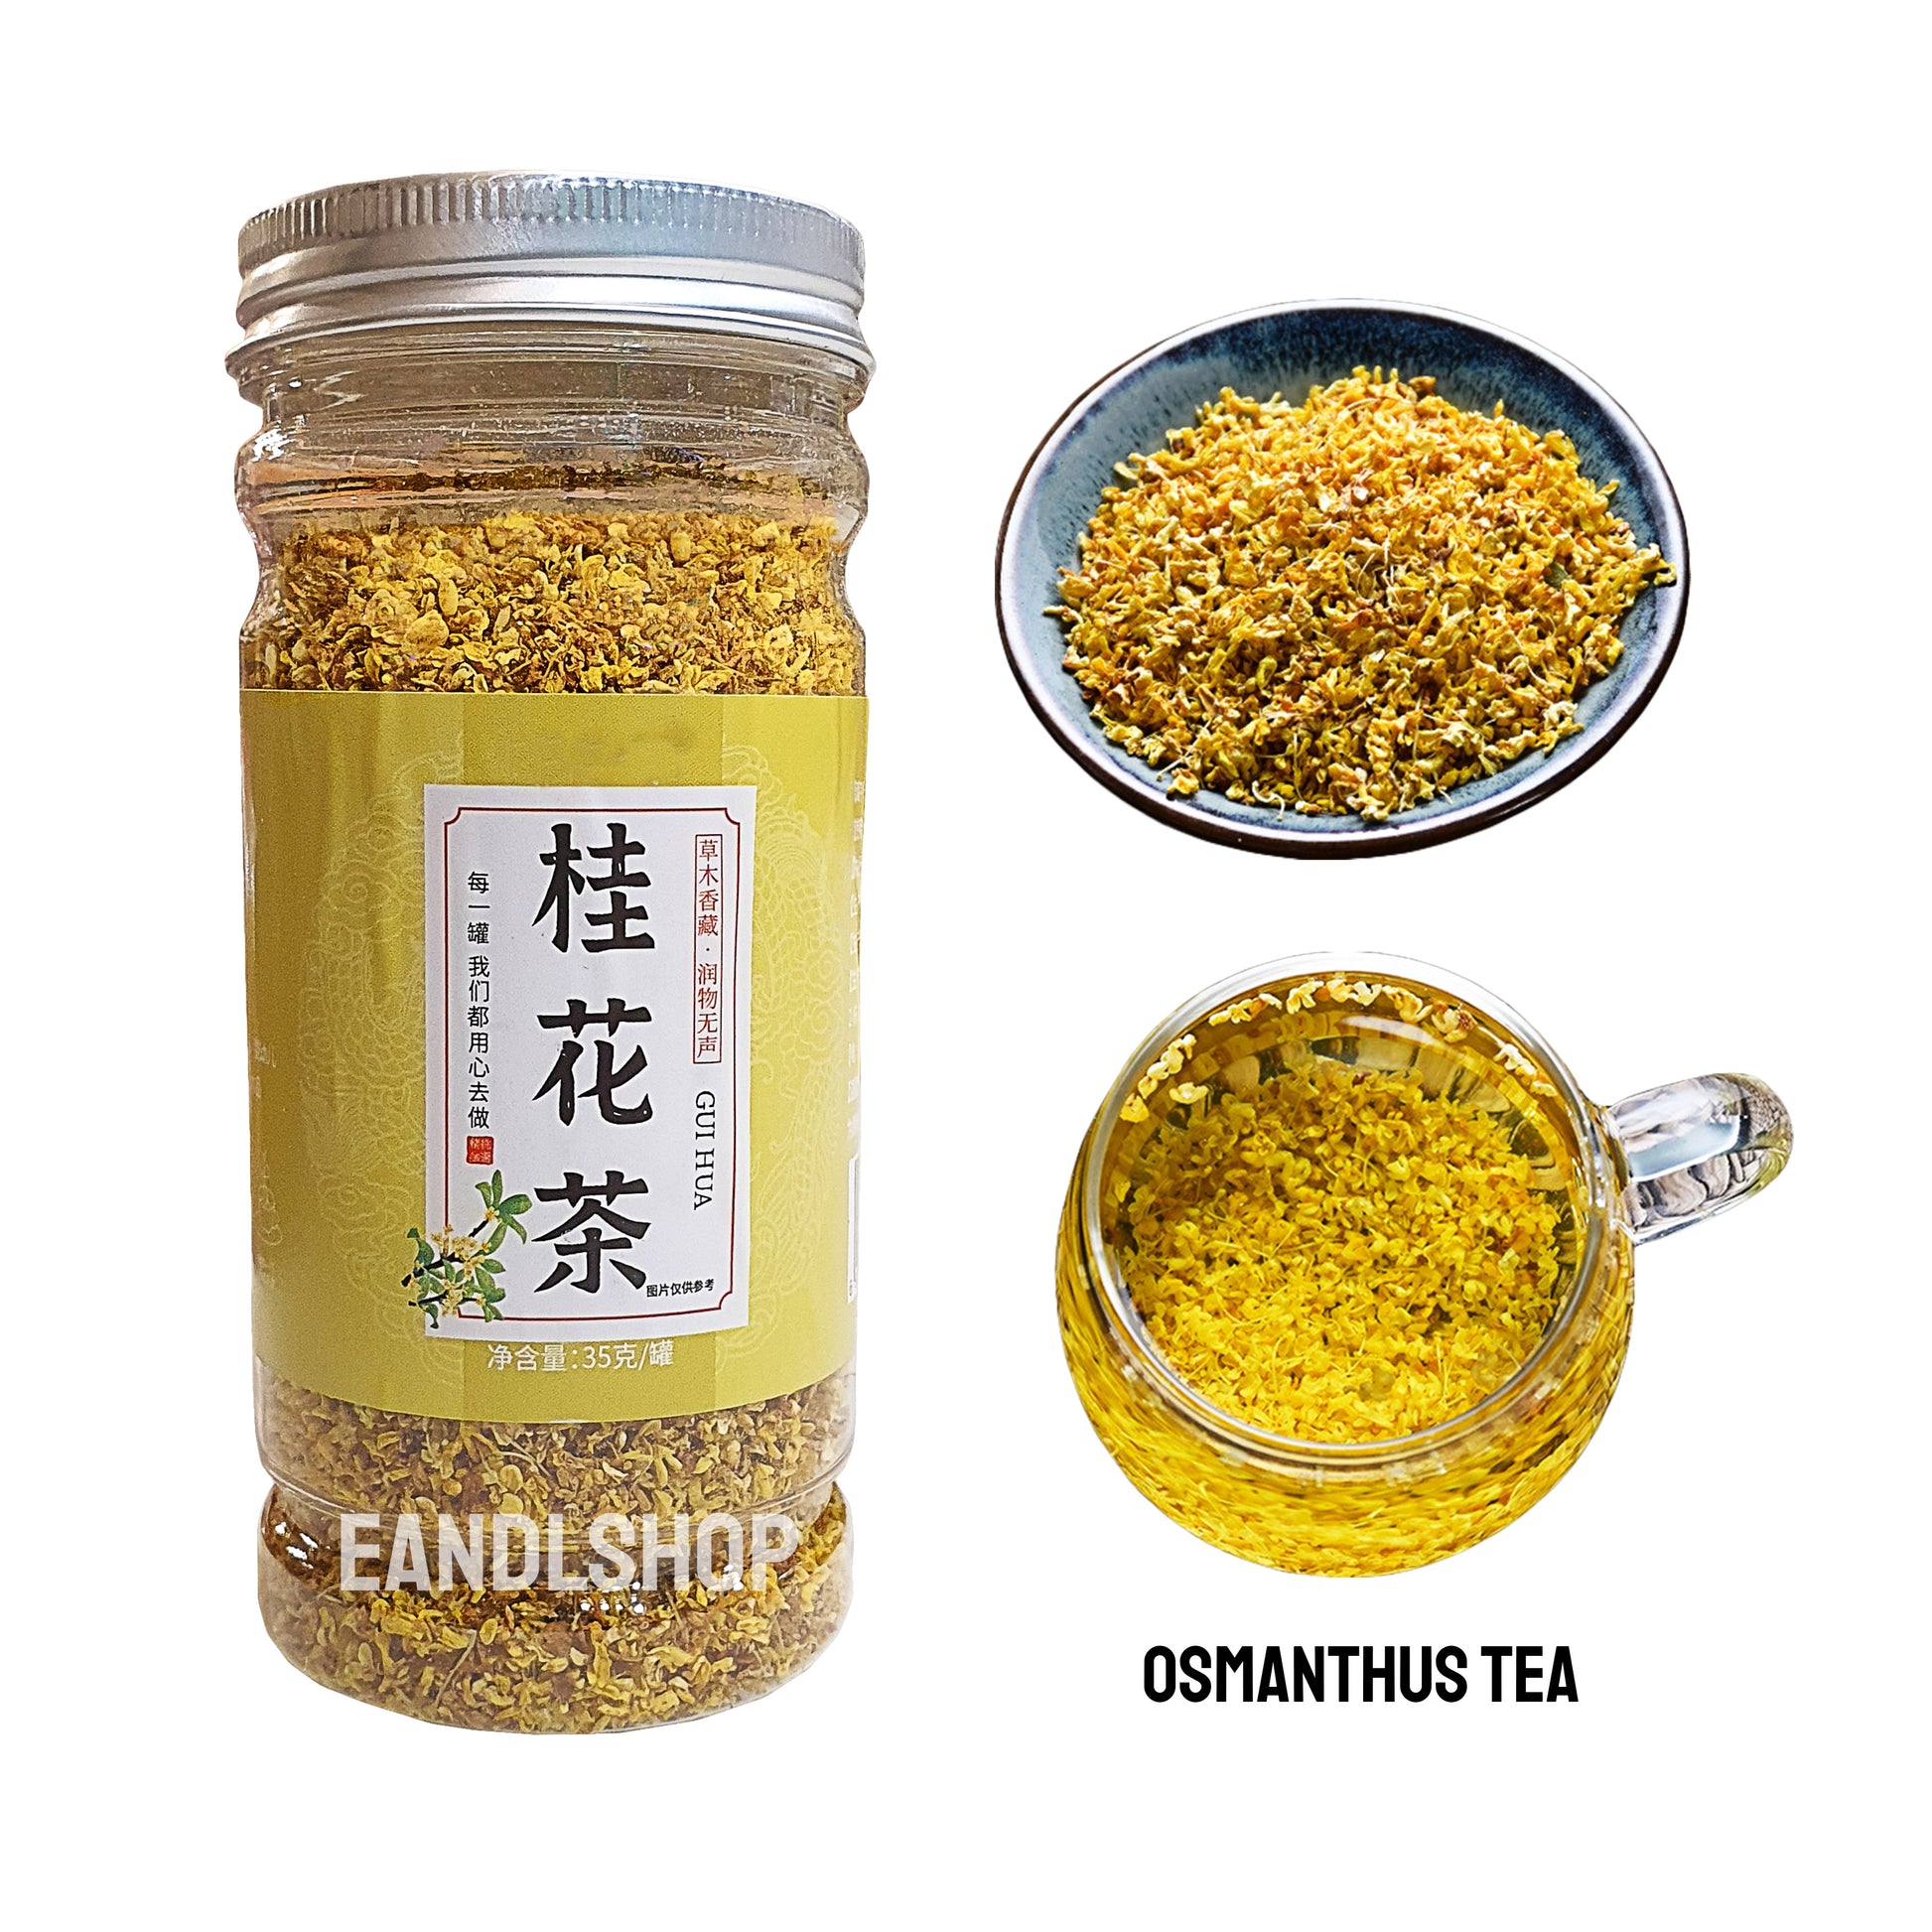 Osmanthus Tea.  Old-school biscuits, modern snacks (chips, crackers), cakes, gummies, plums, dried fruits, nuts, herbal tea – available at www.EANDLSHOP.com